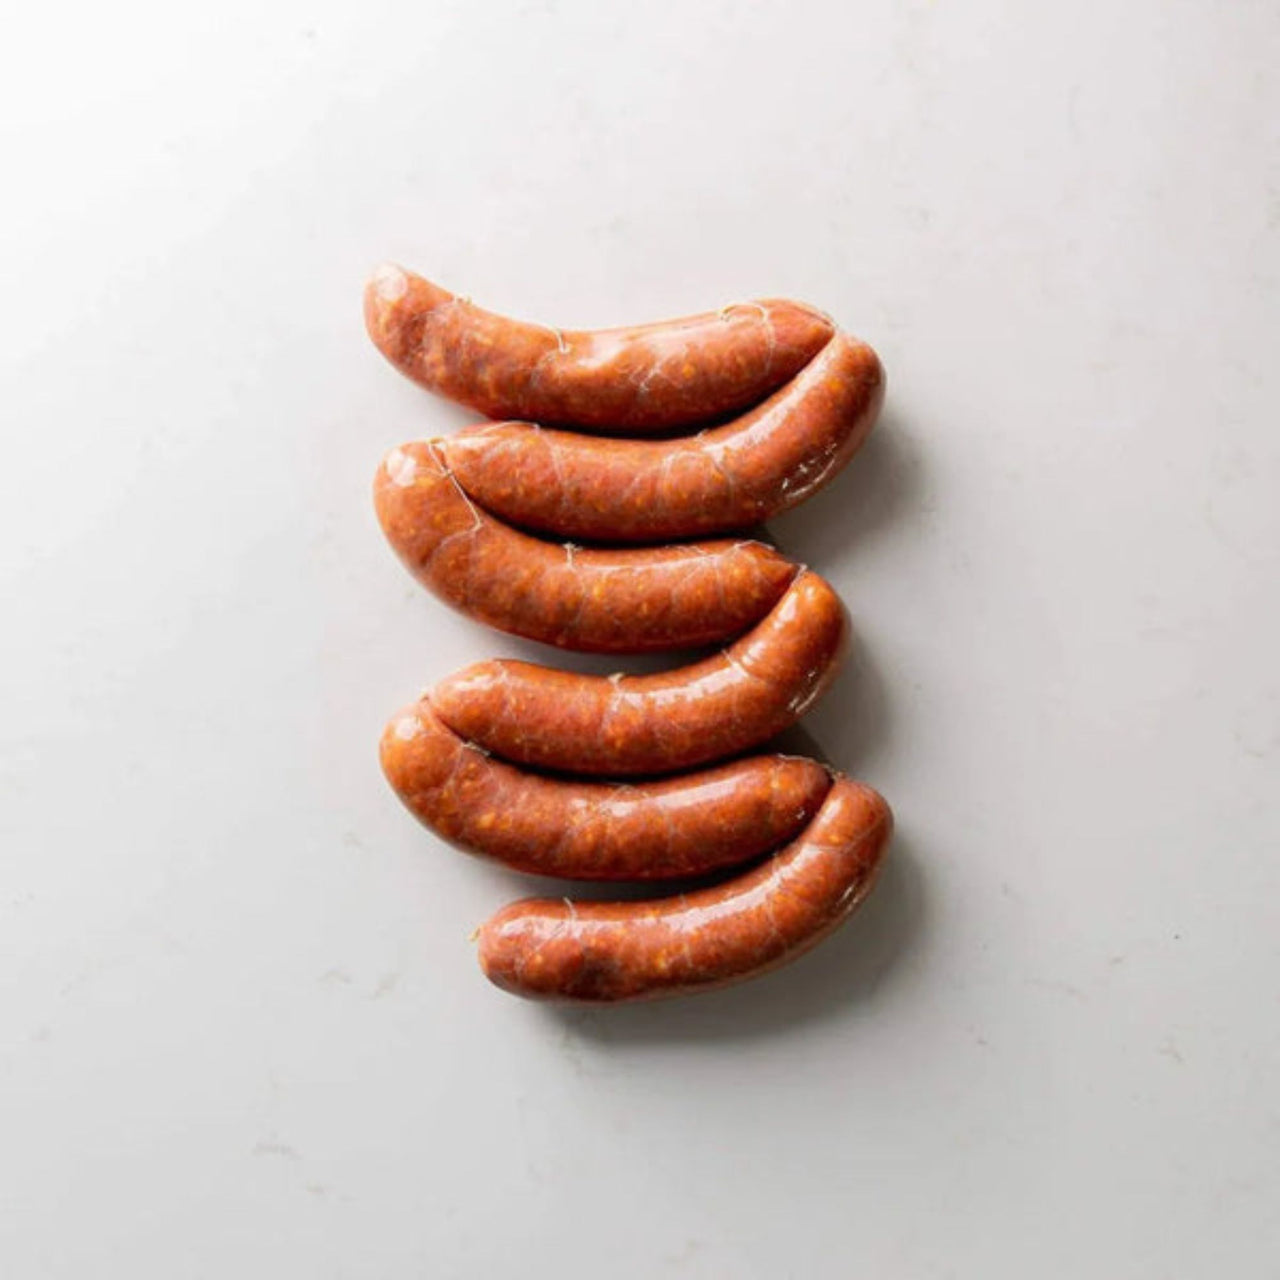 Image of F2F Hot Italian Sausages 1.8kg Pack of 12 - 1 x 1.8 Kilos